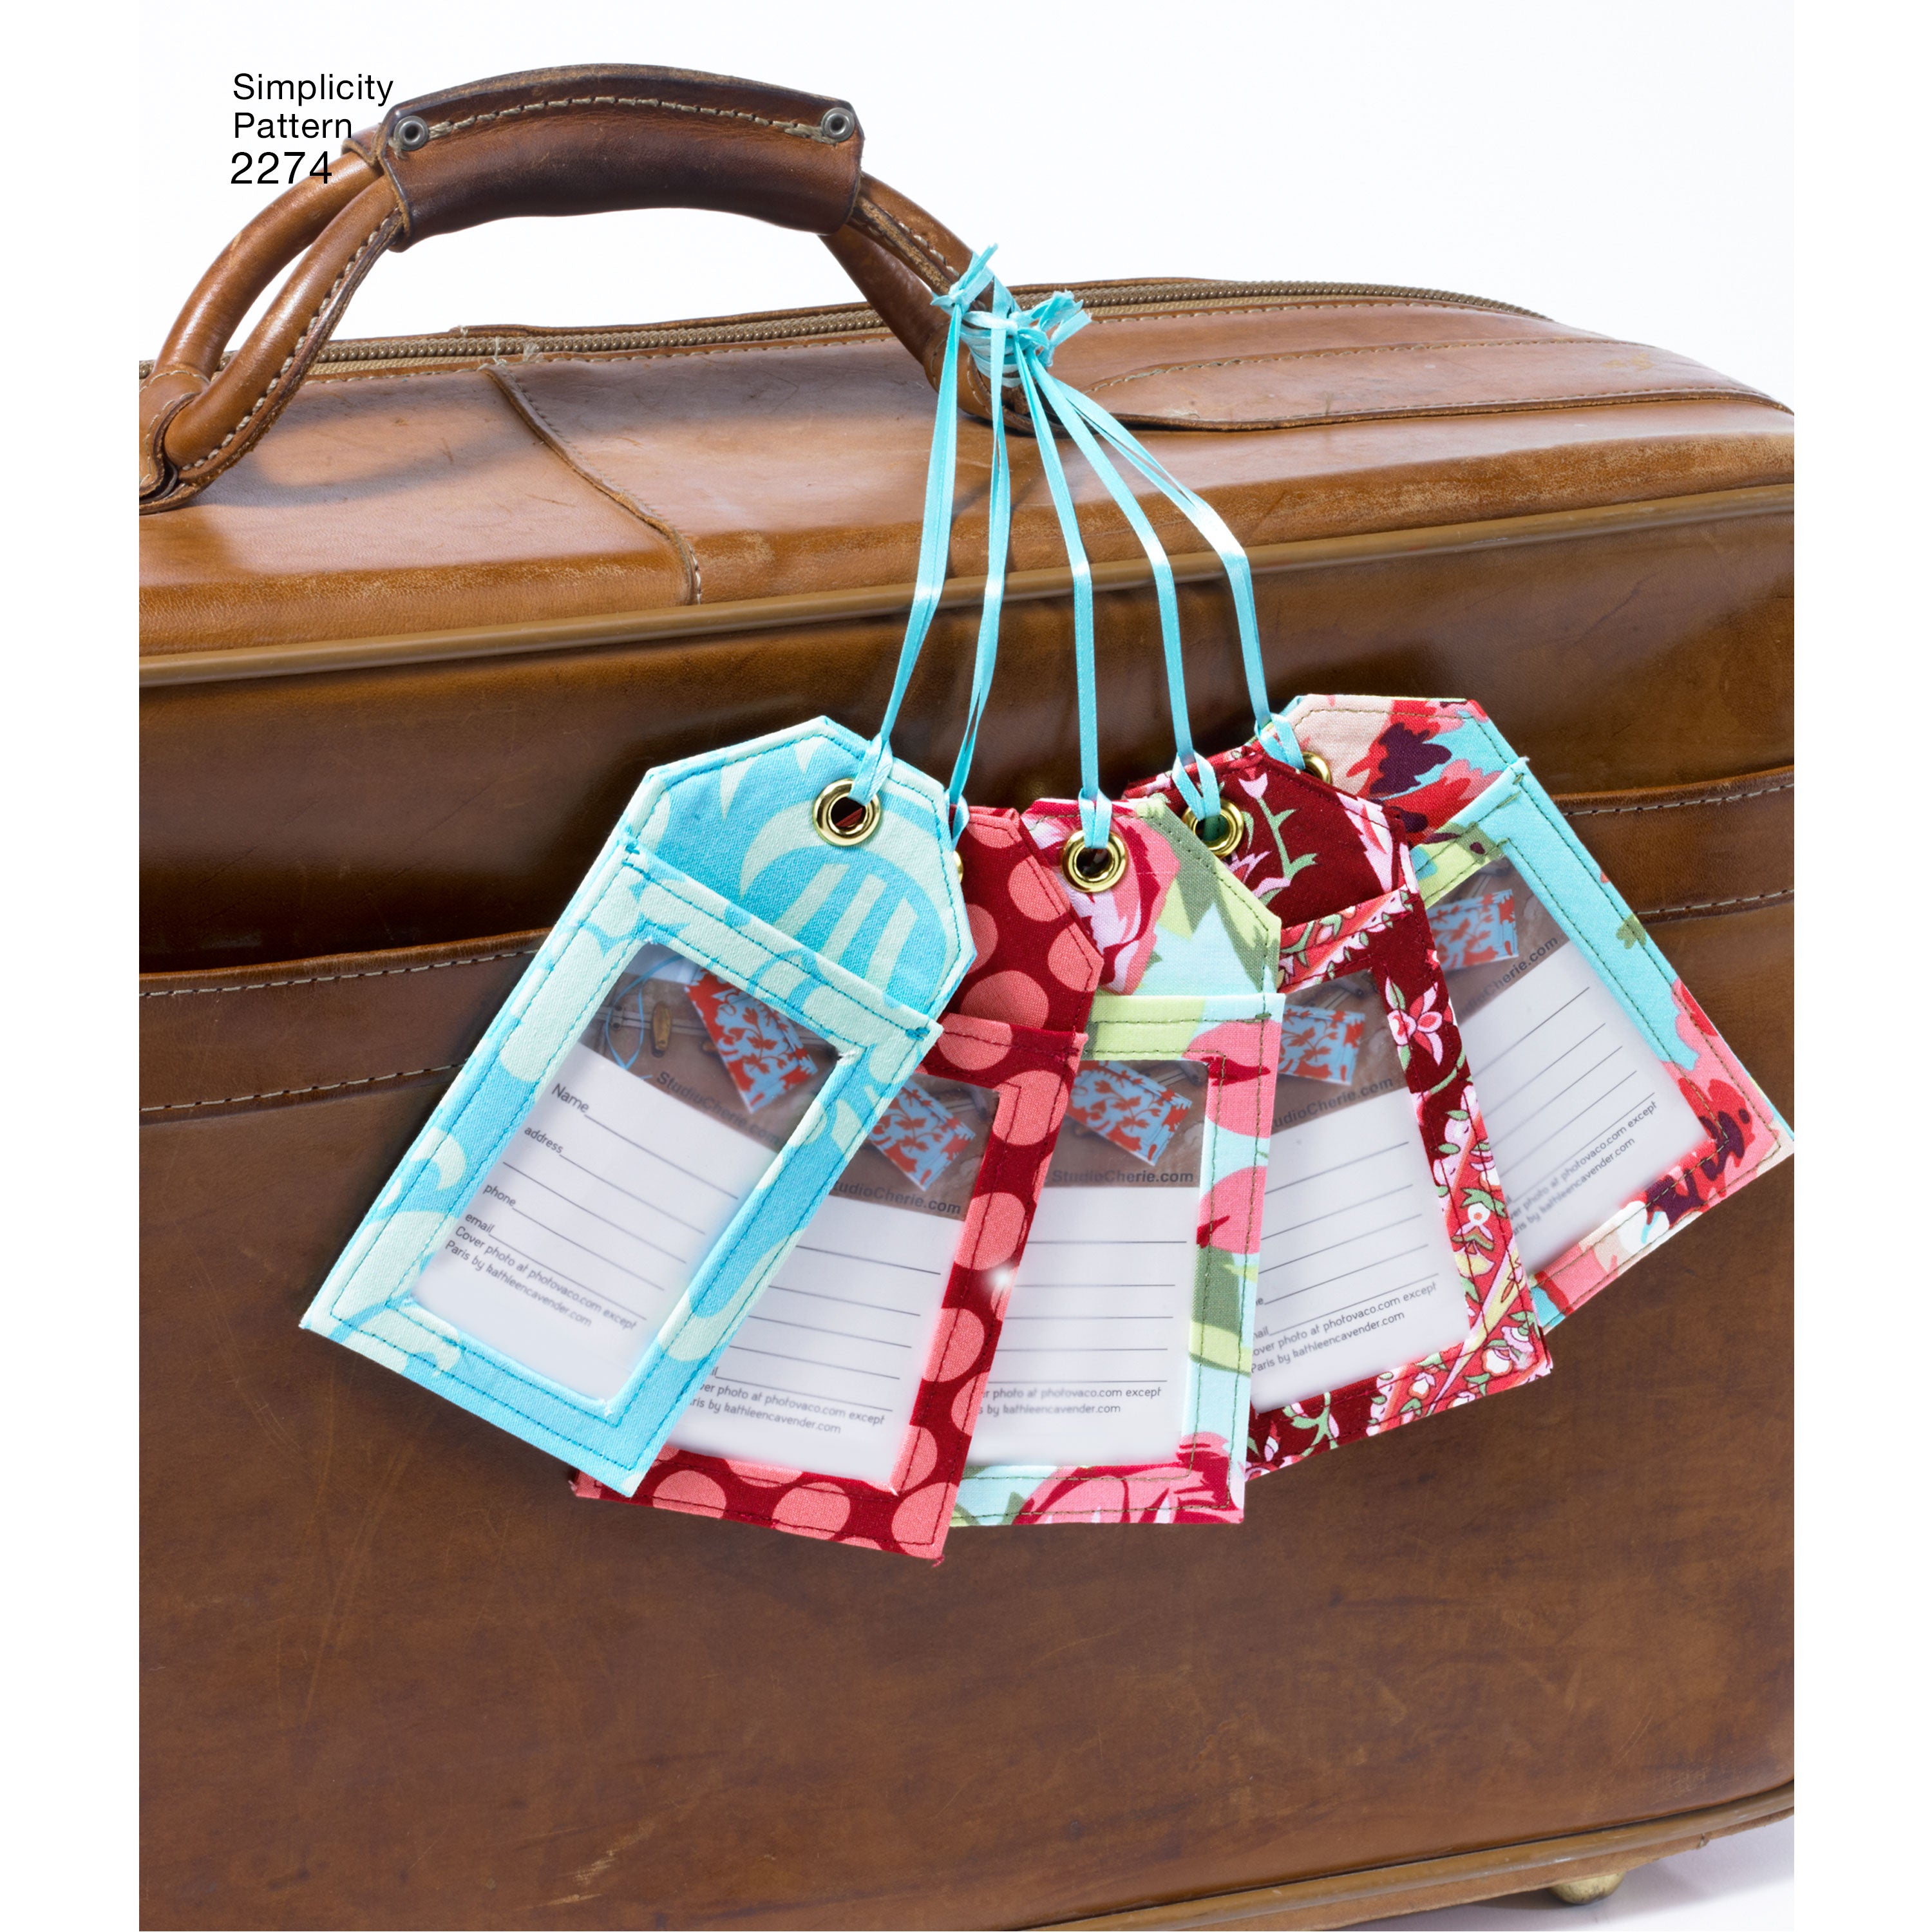 Simplicity Pattern 2274 Bags from Jaycotts Sewing Supplies